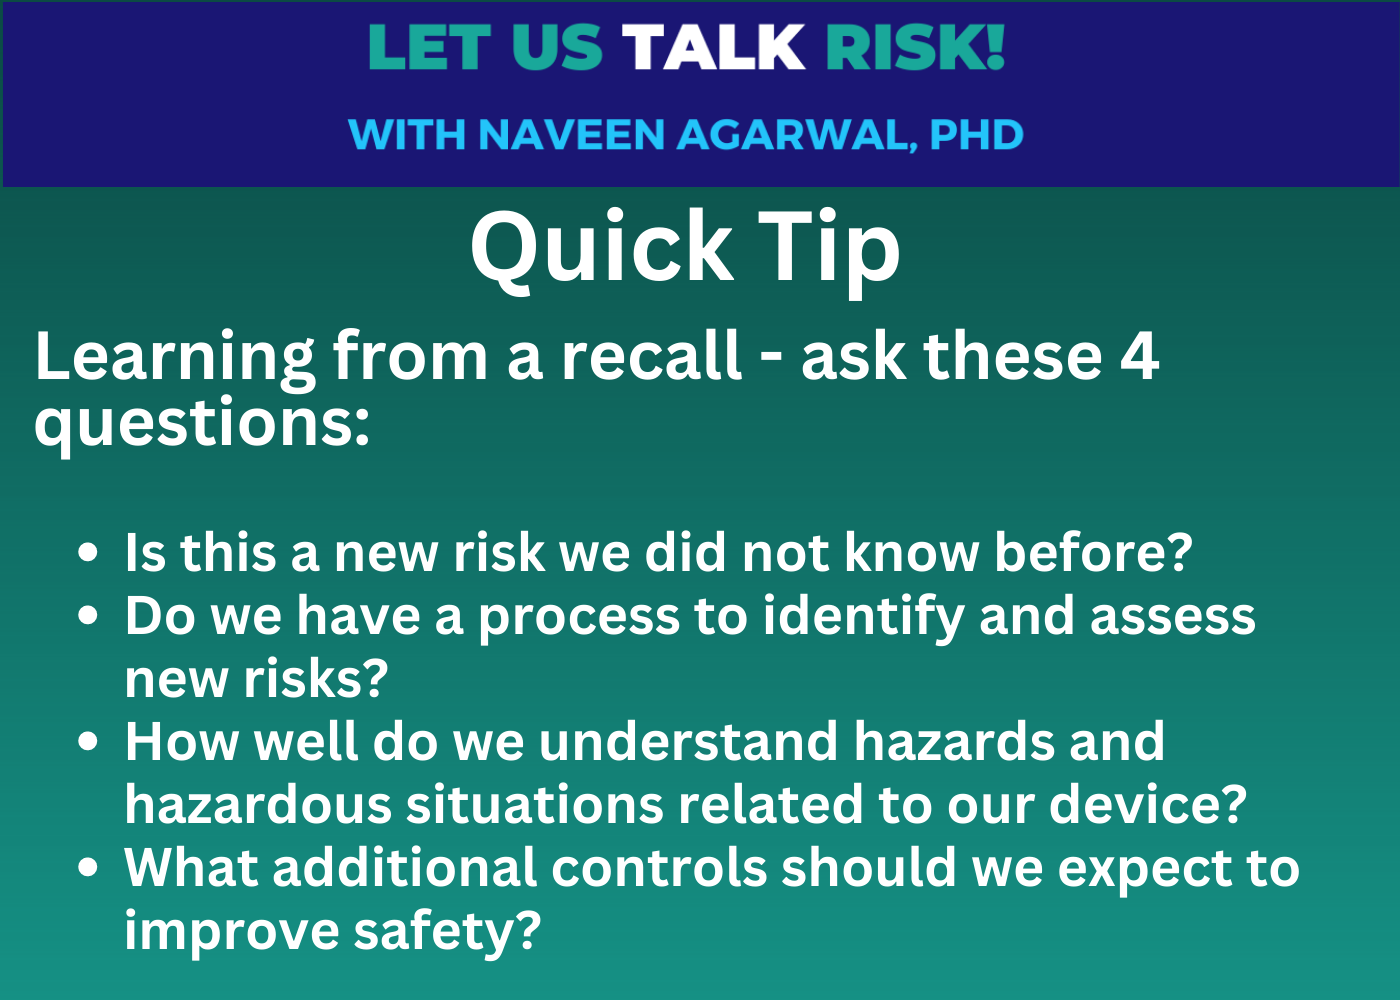 Quick tip - 4 questions to ask when confronting a recall